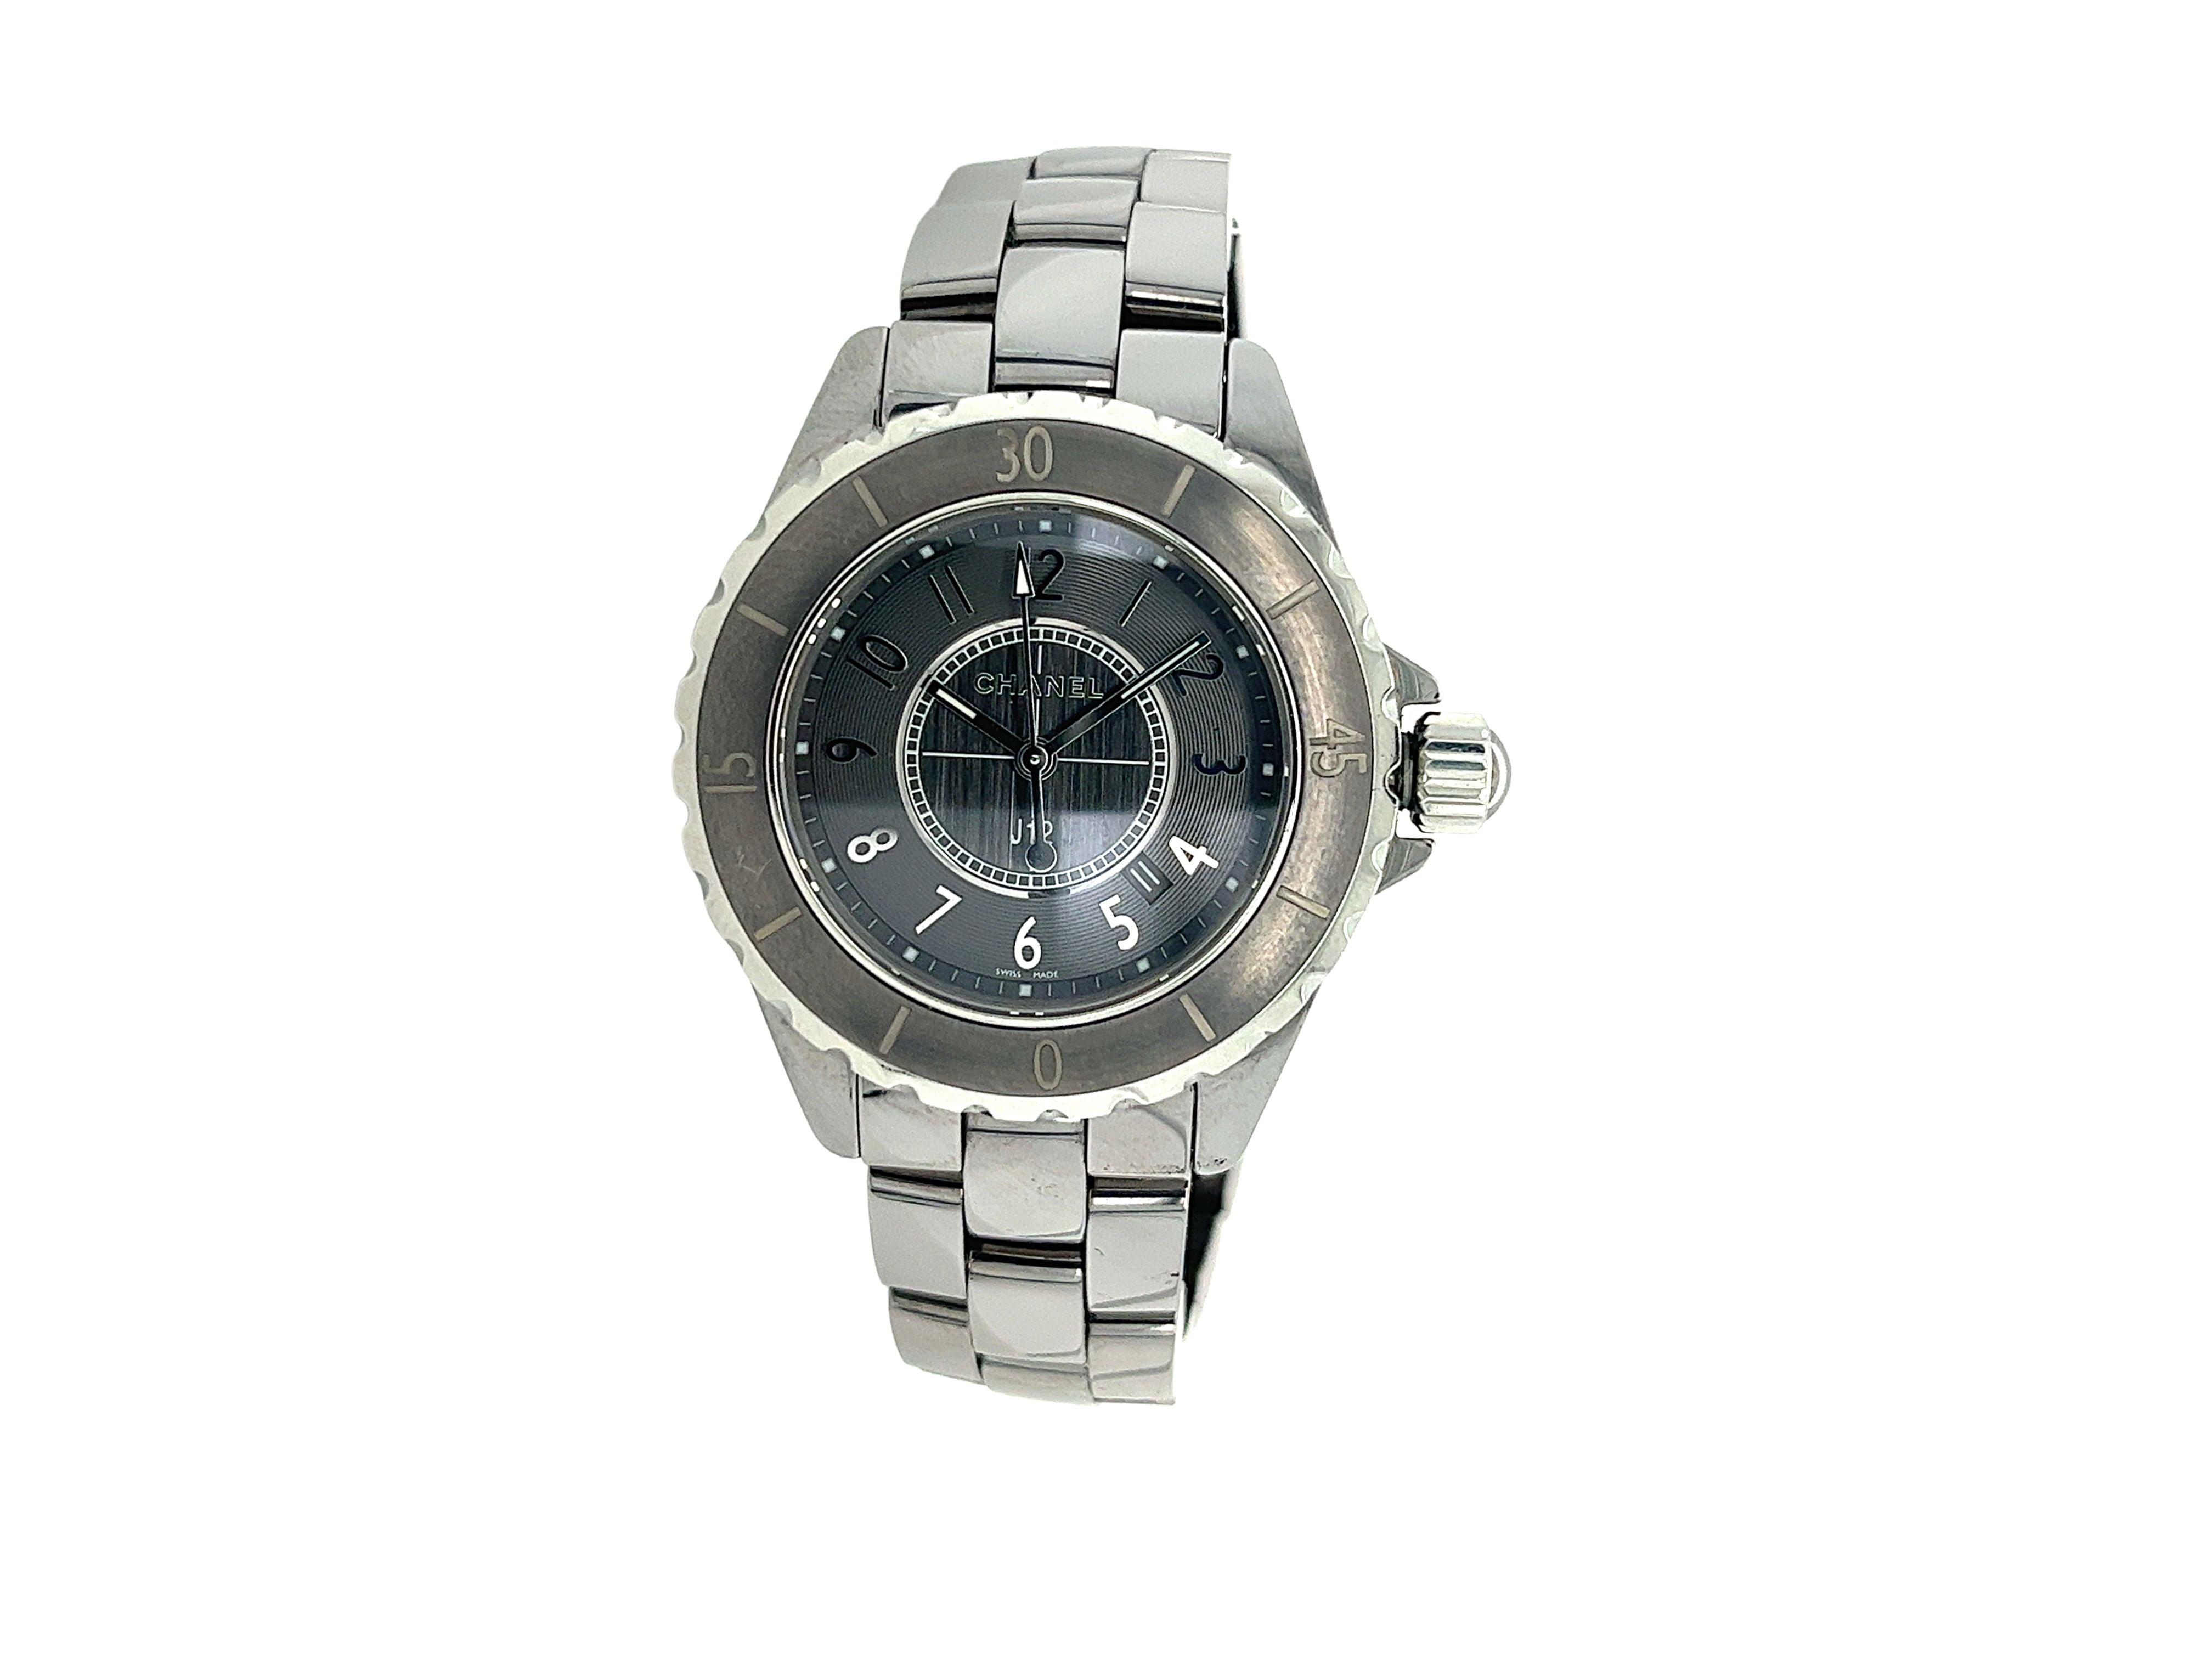 Chanel J12 Quartz Black Ceramic And Stainless Steel 33mm Watch – ASSAY